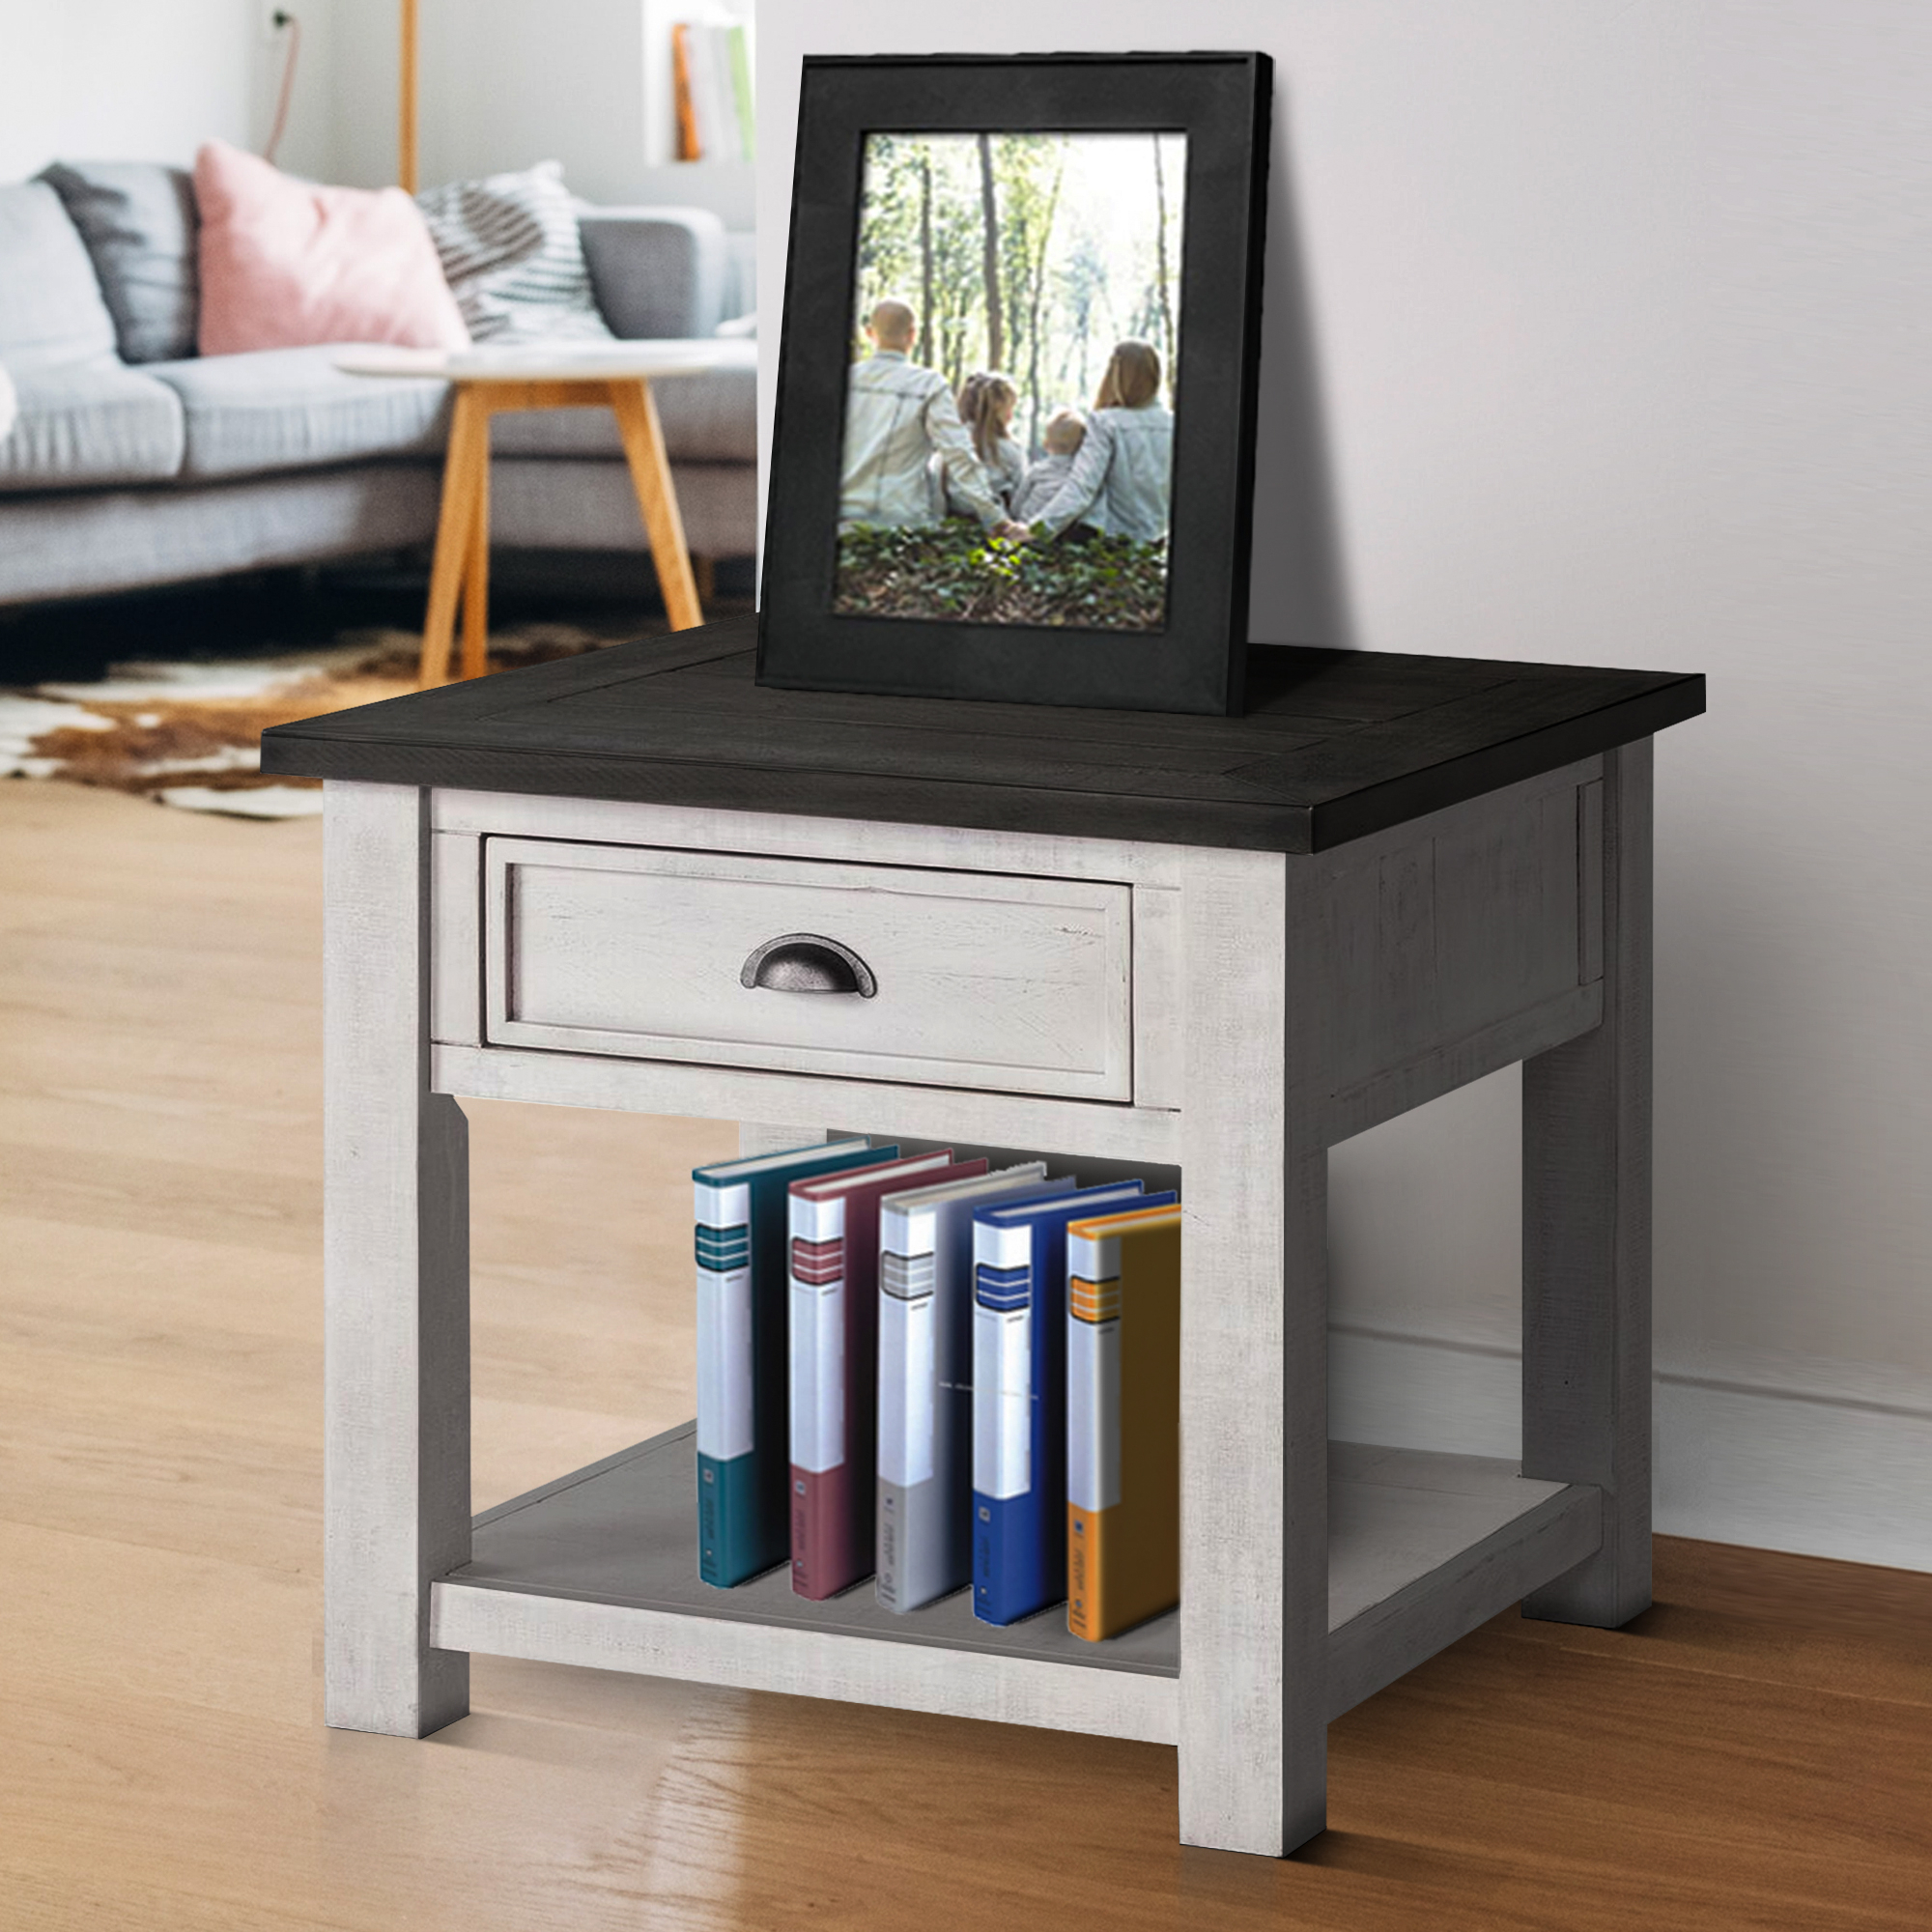 Coastal Style Square Wooden End Table With 1 Drawer, White And Gray- Saltoro Sherpi